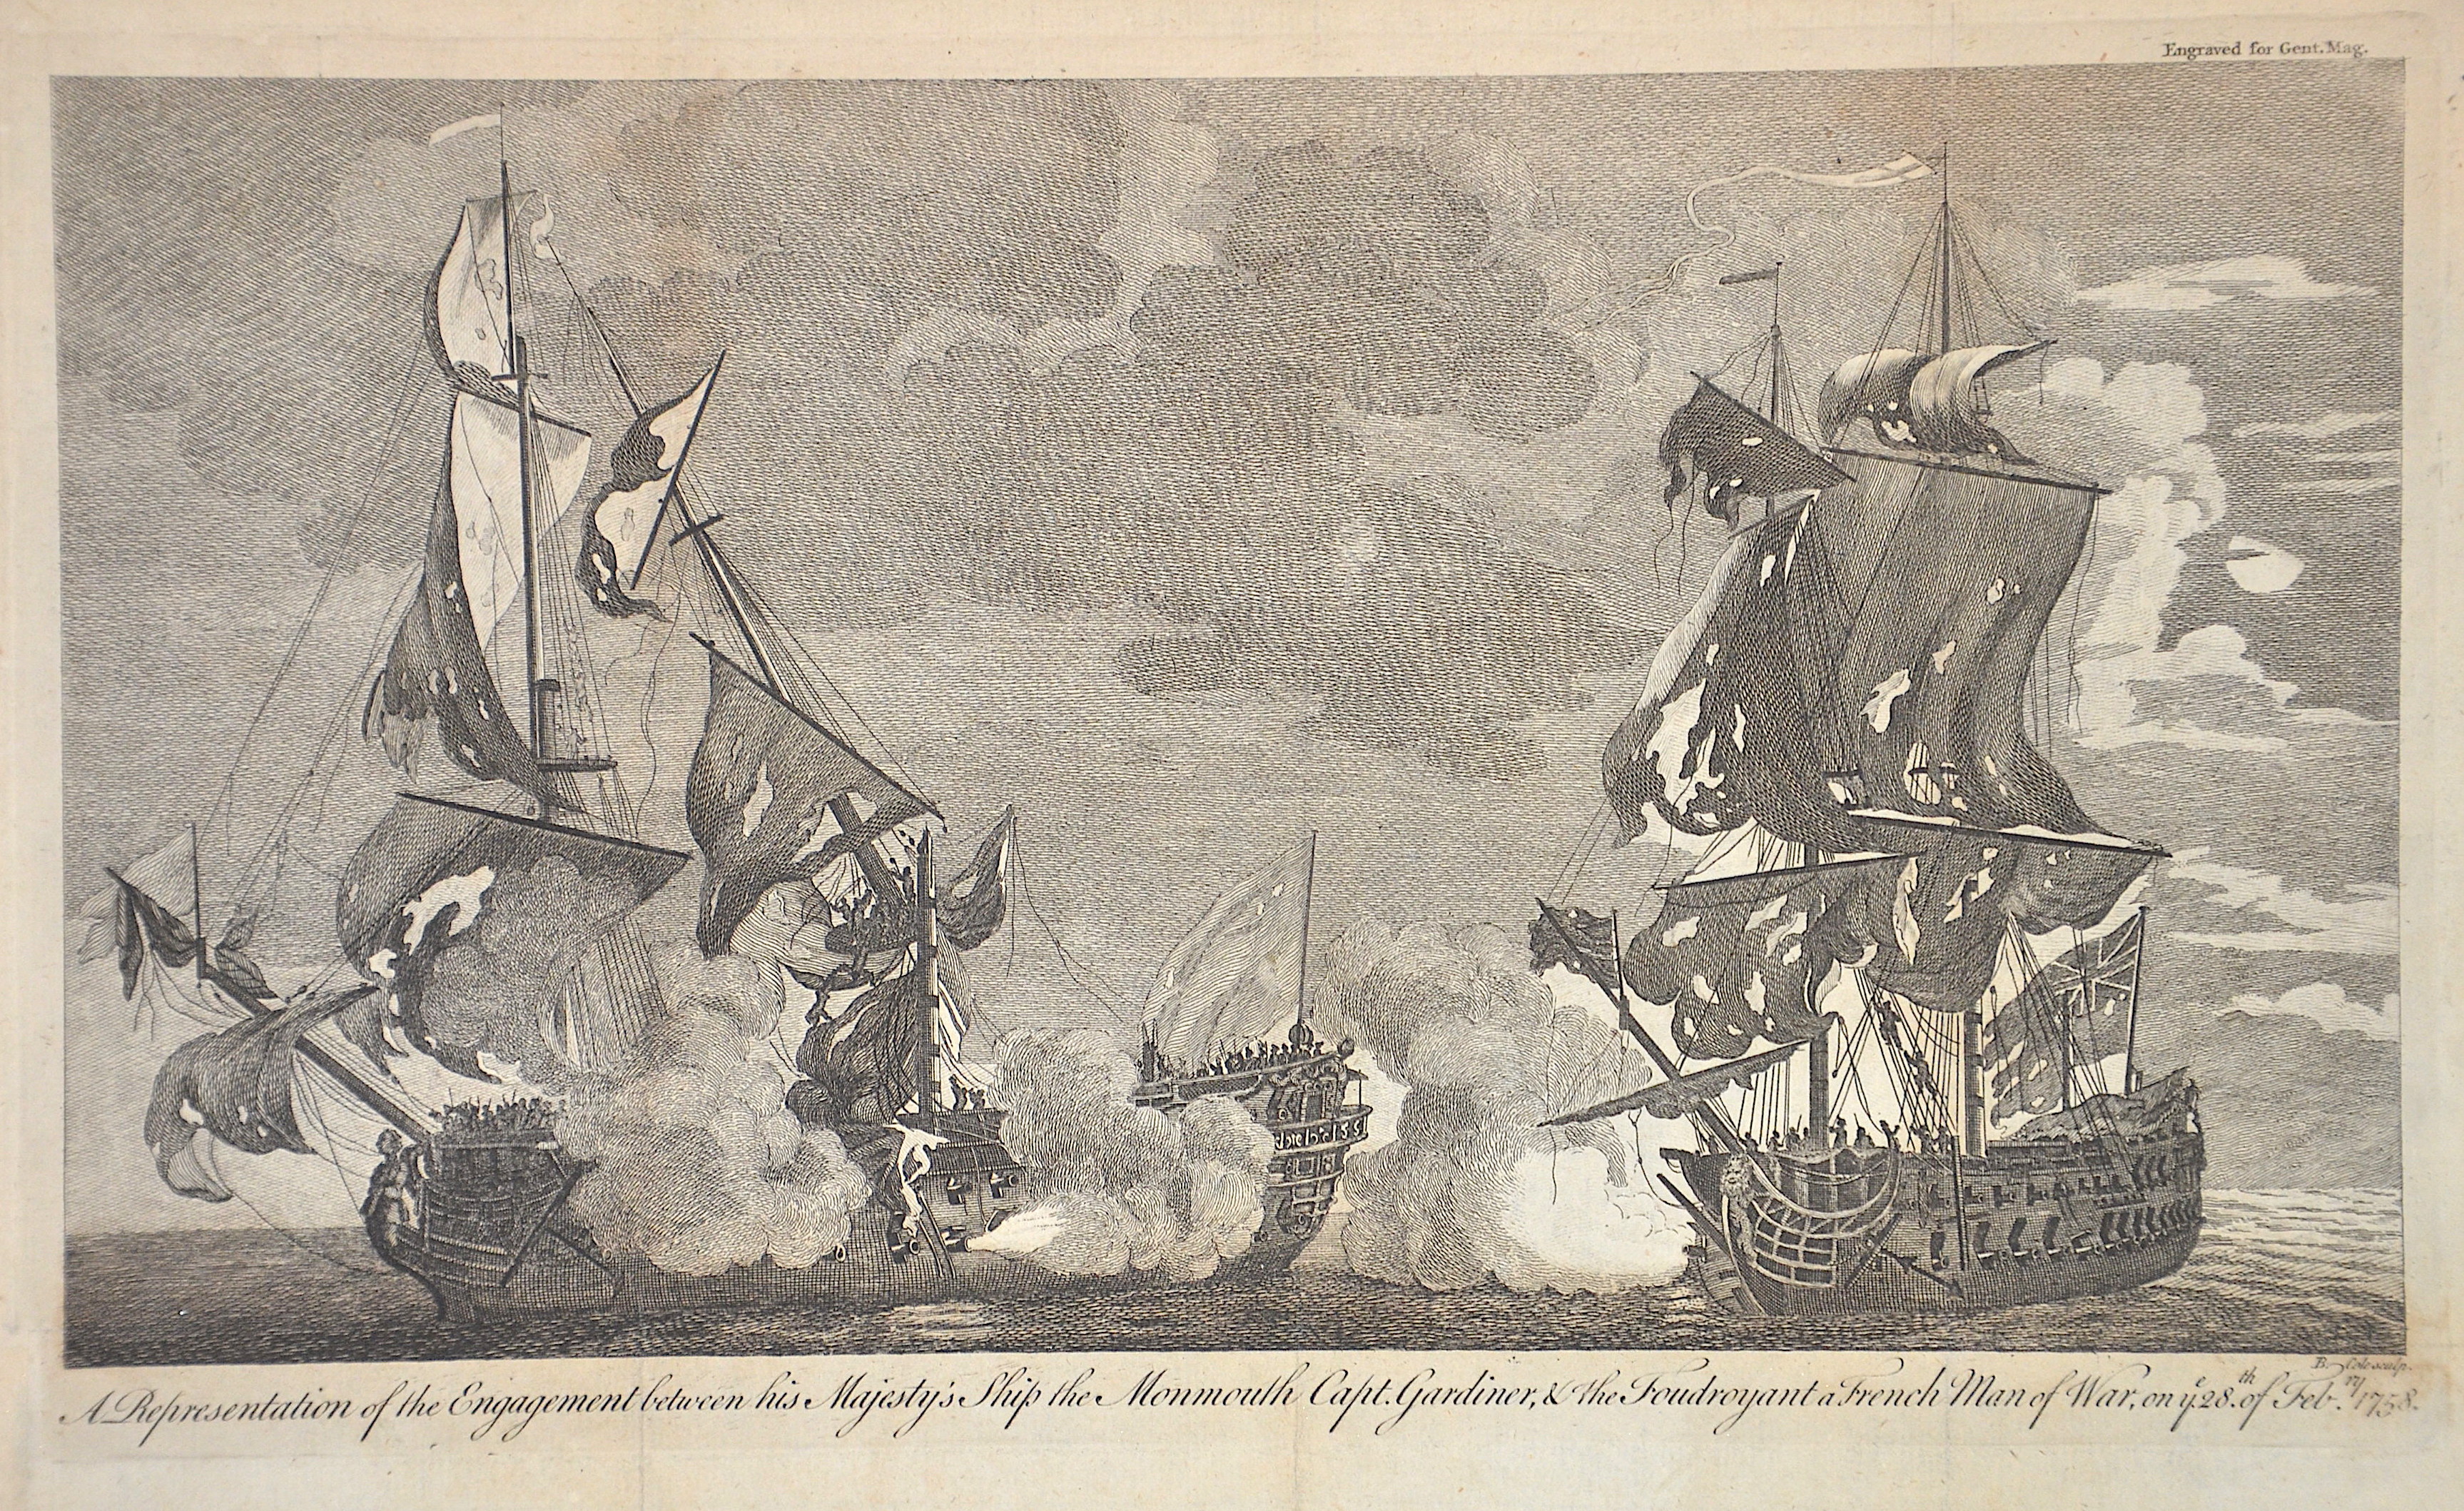 Cole Benjamin A Representation of the Engagement between his Majesty’s Ship the Monmouth Capt. Gardiner, u the Foudroyant a French Man of War, on y 28. of Feb. 1758